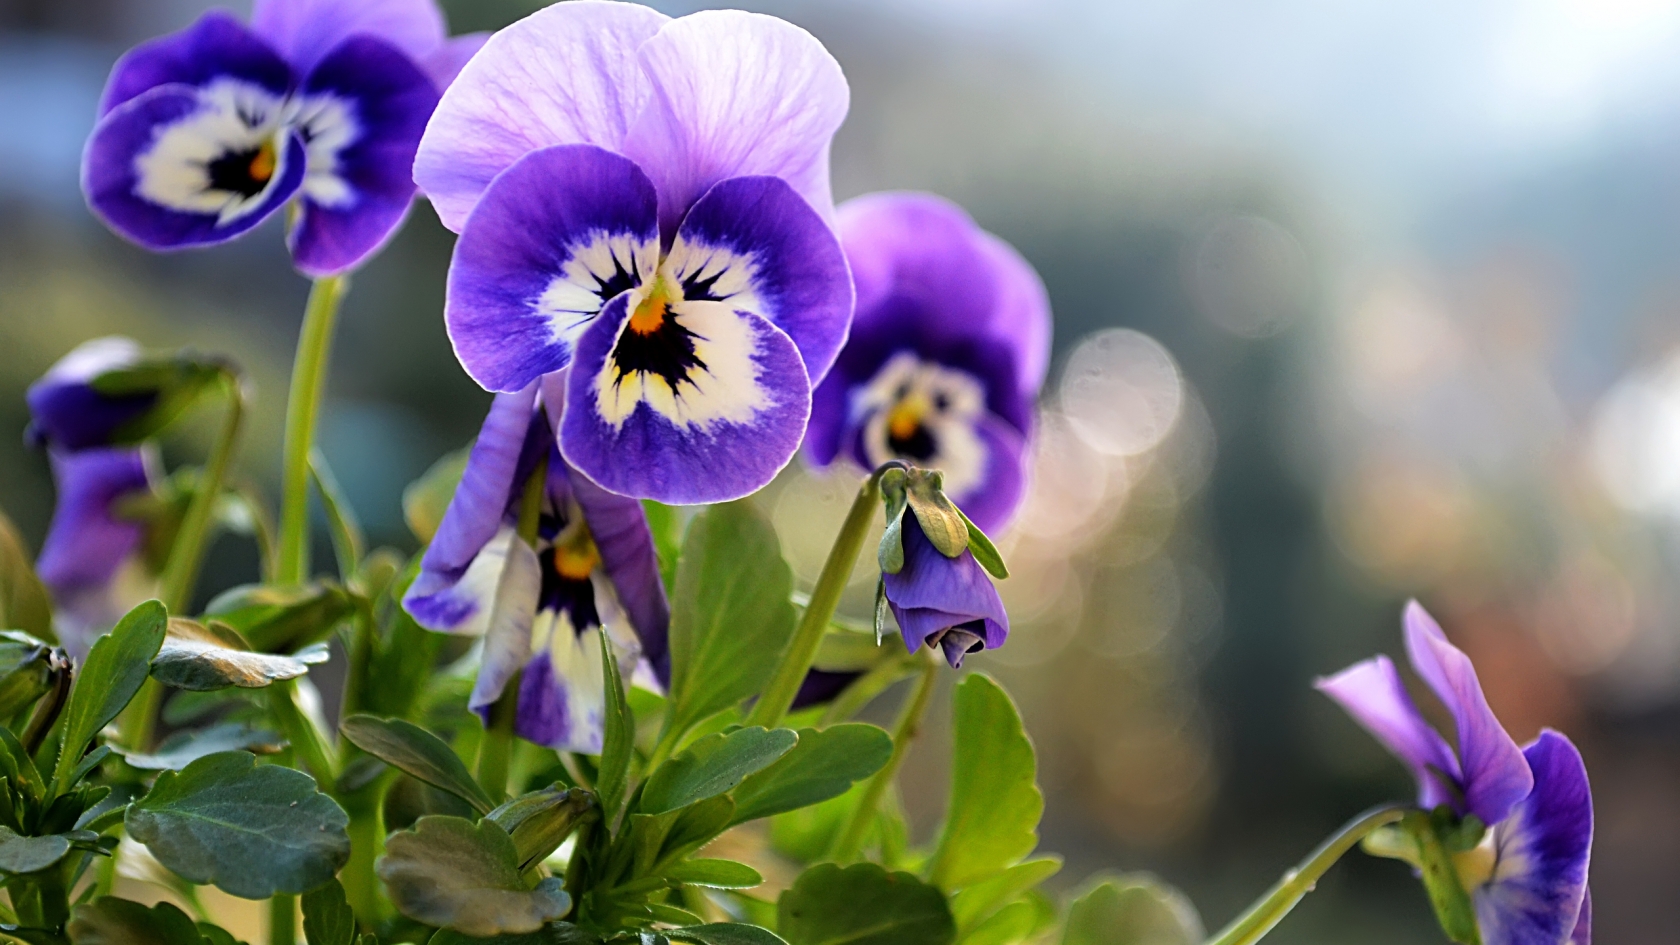 Beautiful Little Pansies for 1680 x 945 HDTV resolution